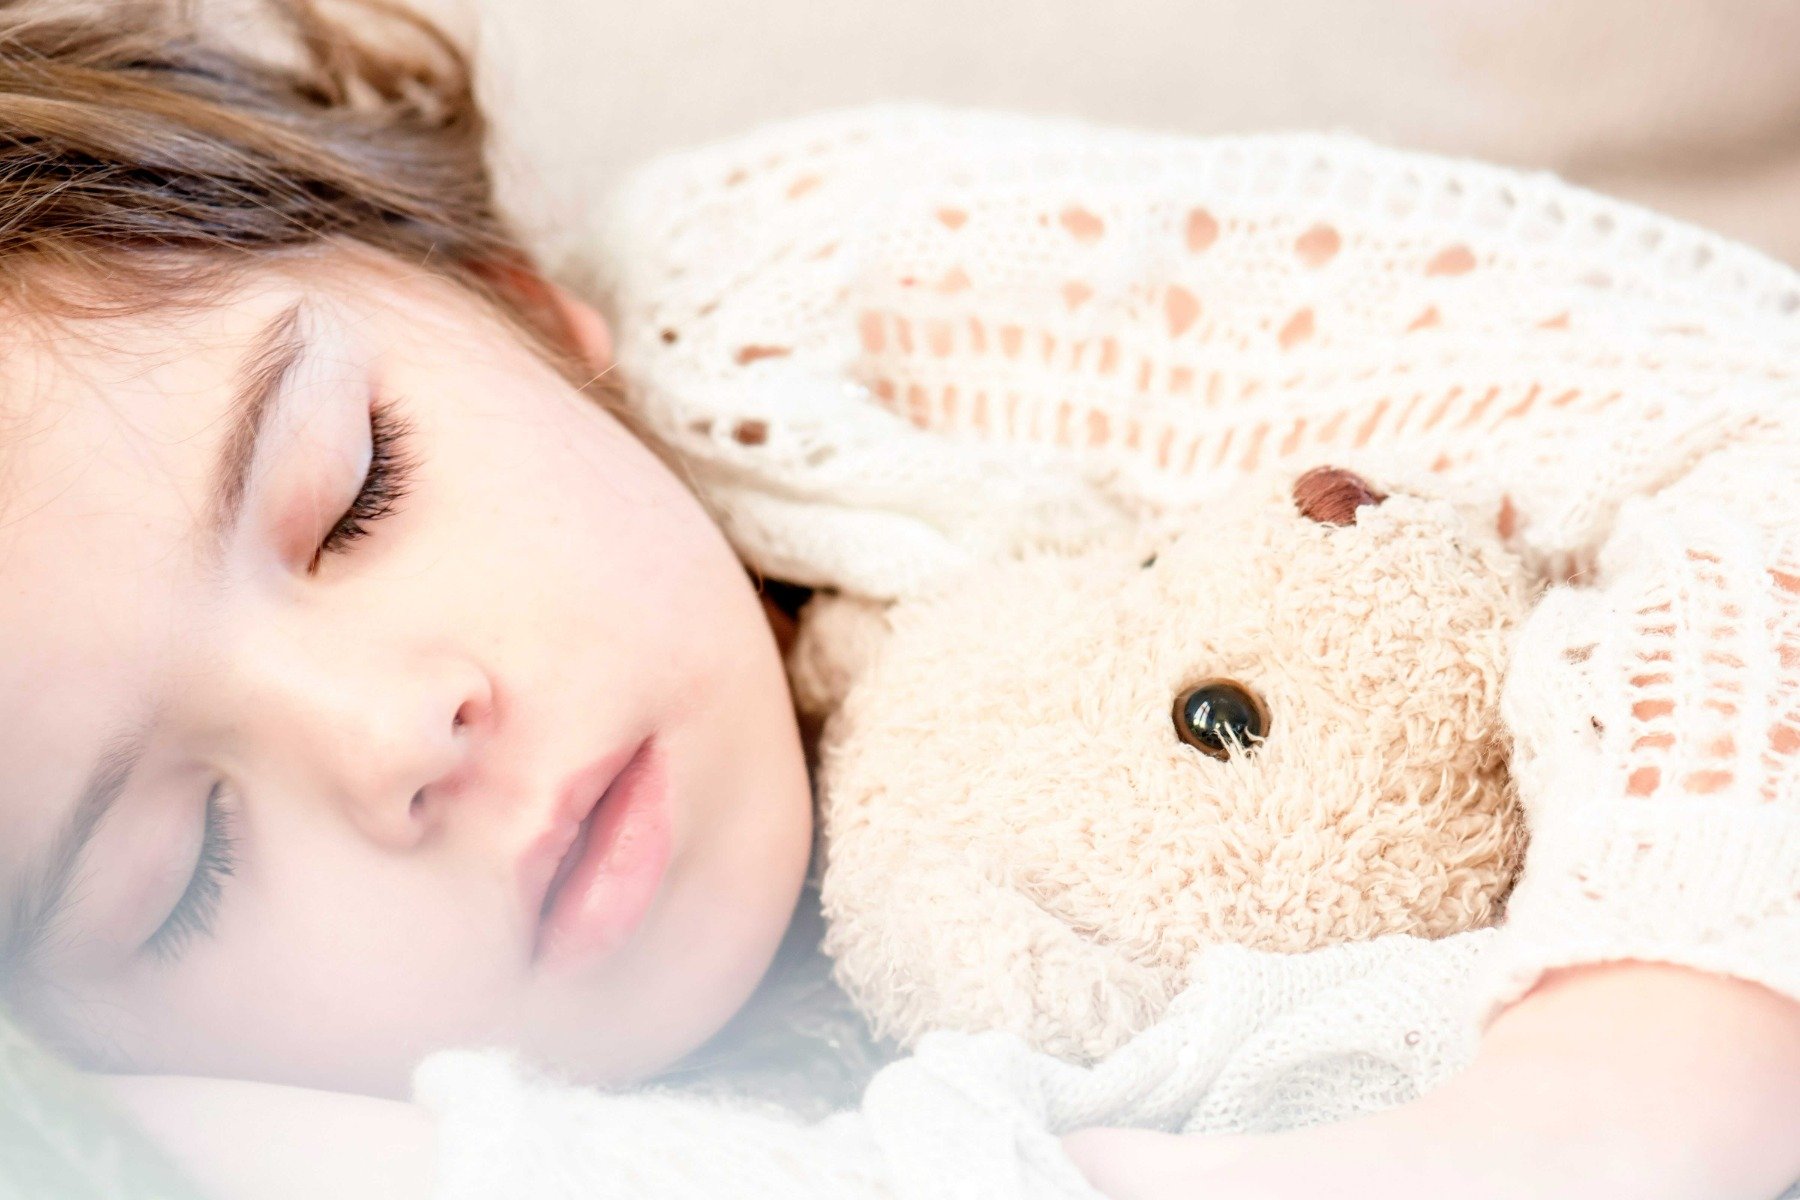 New Study Finds 1 In 4 Children Don’t Get Enough Sleep